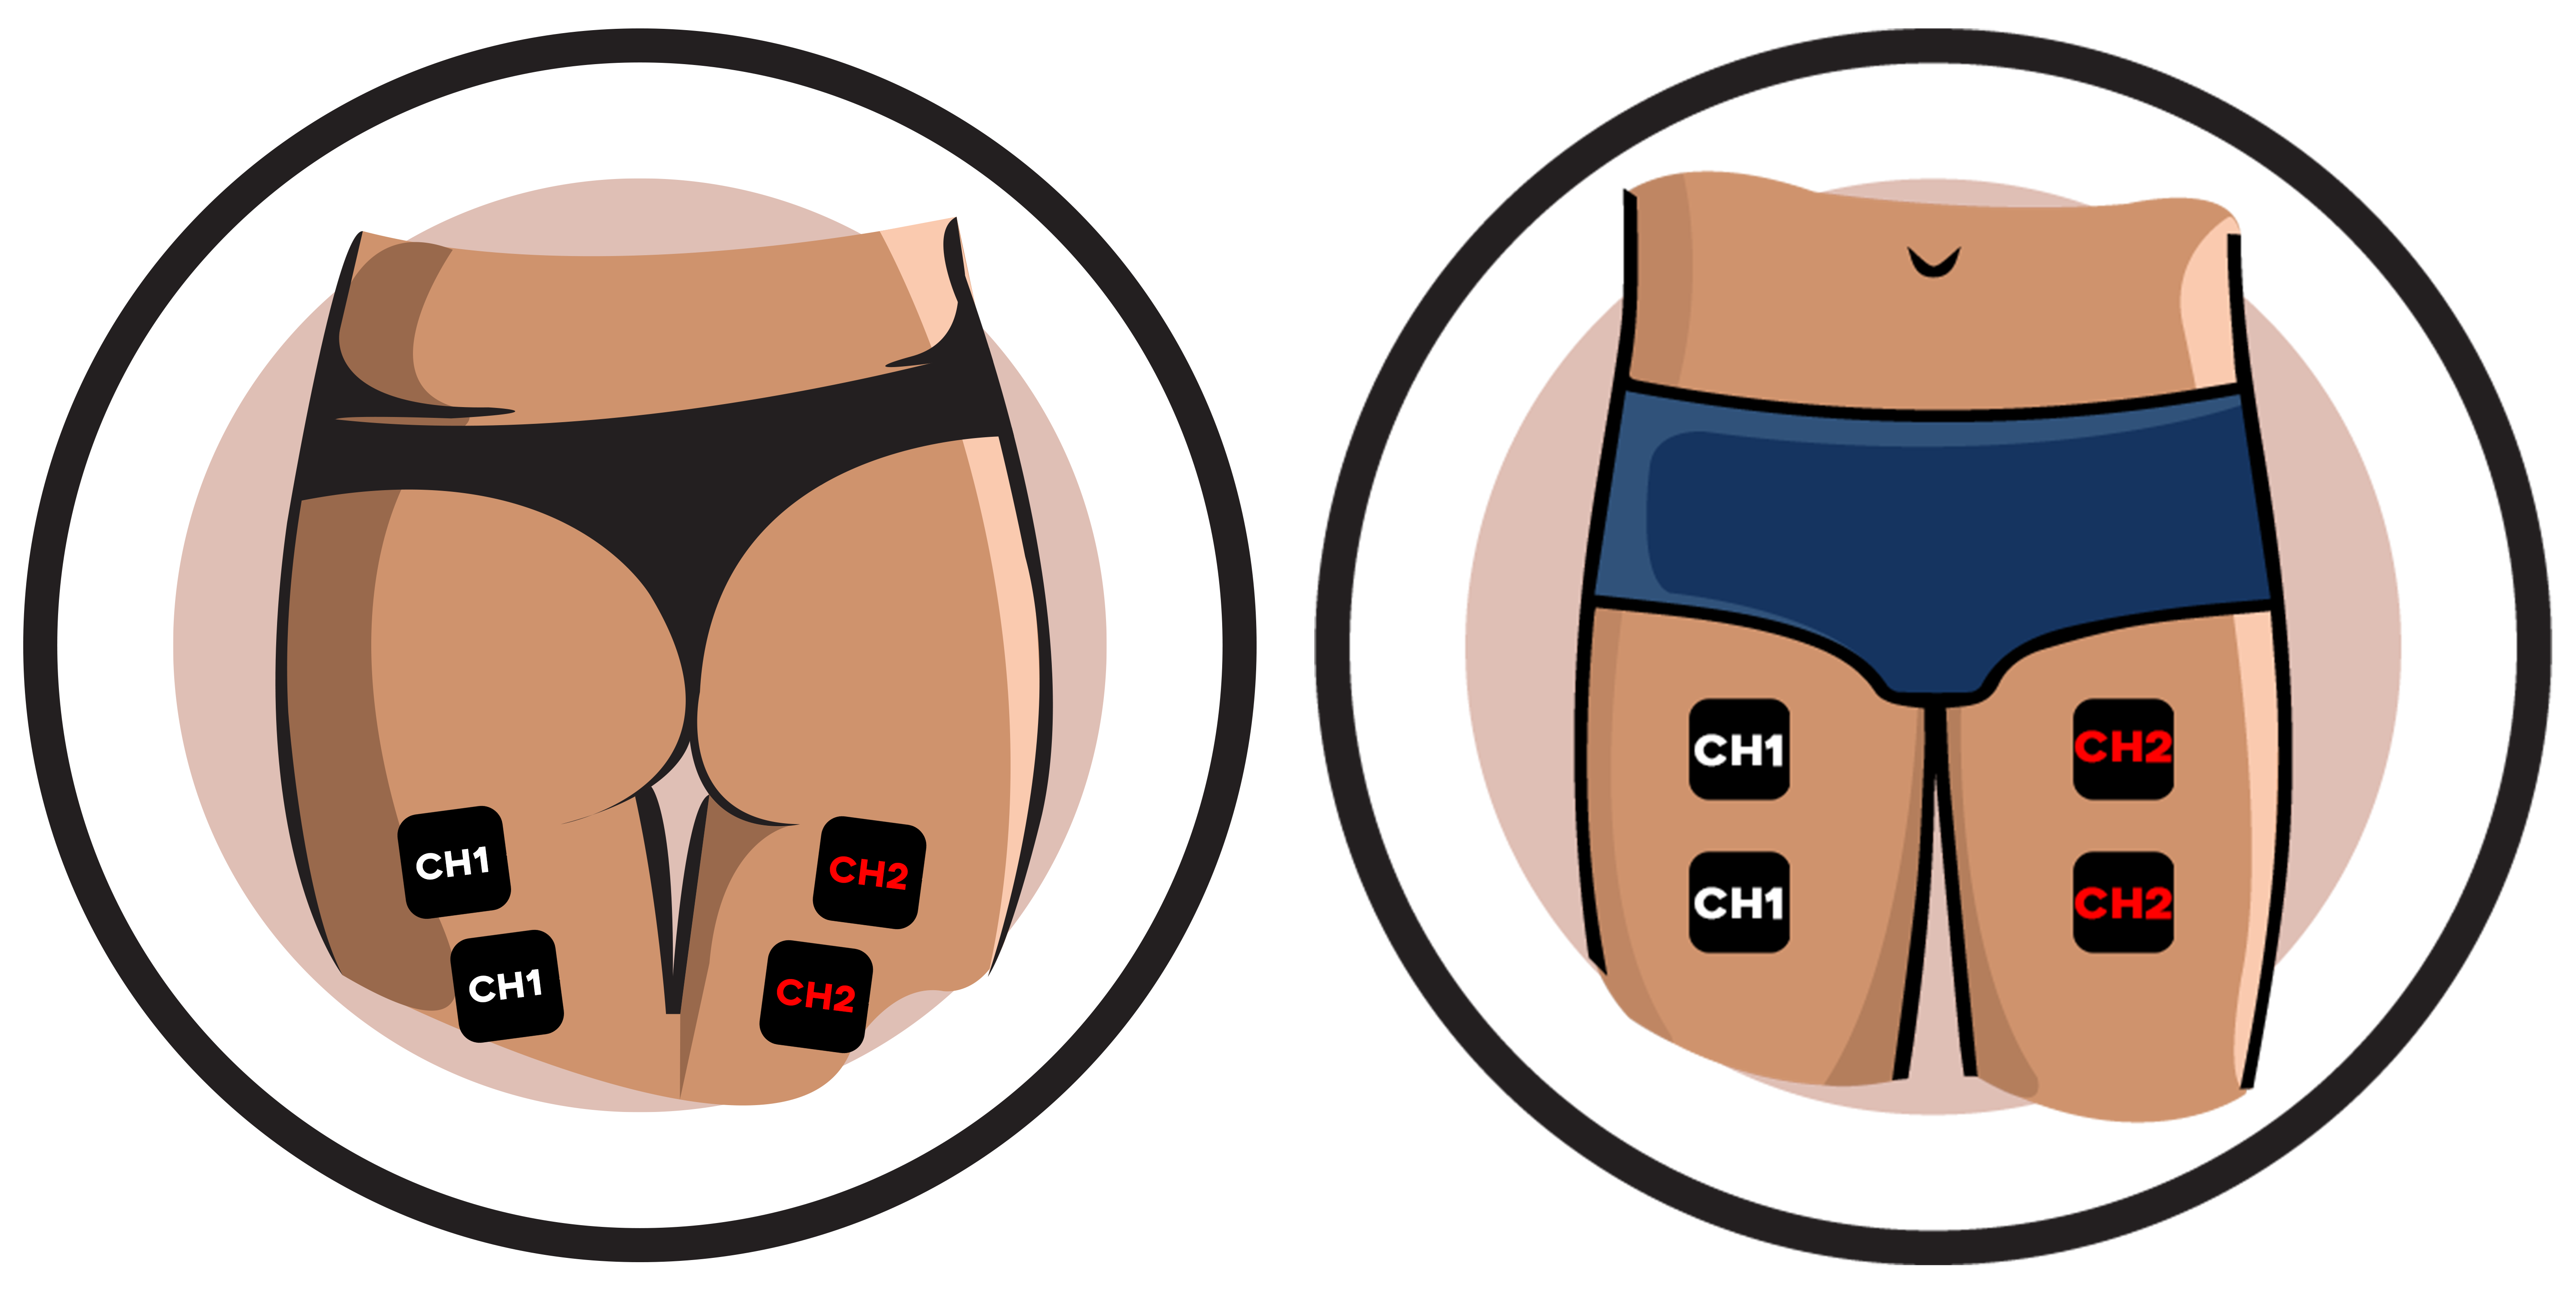 https://ireliev.com/wp-content/uploads/2016/12/Thighs-Electrode-Pad-Placements-4.png